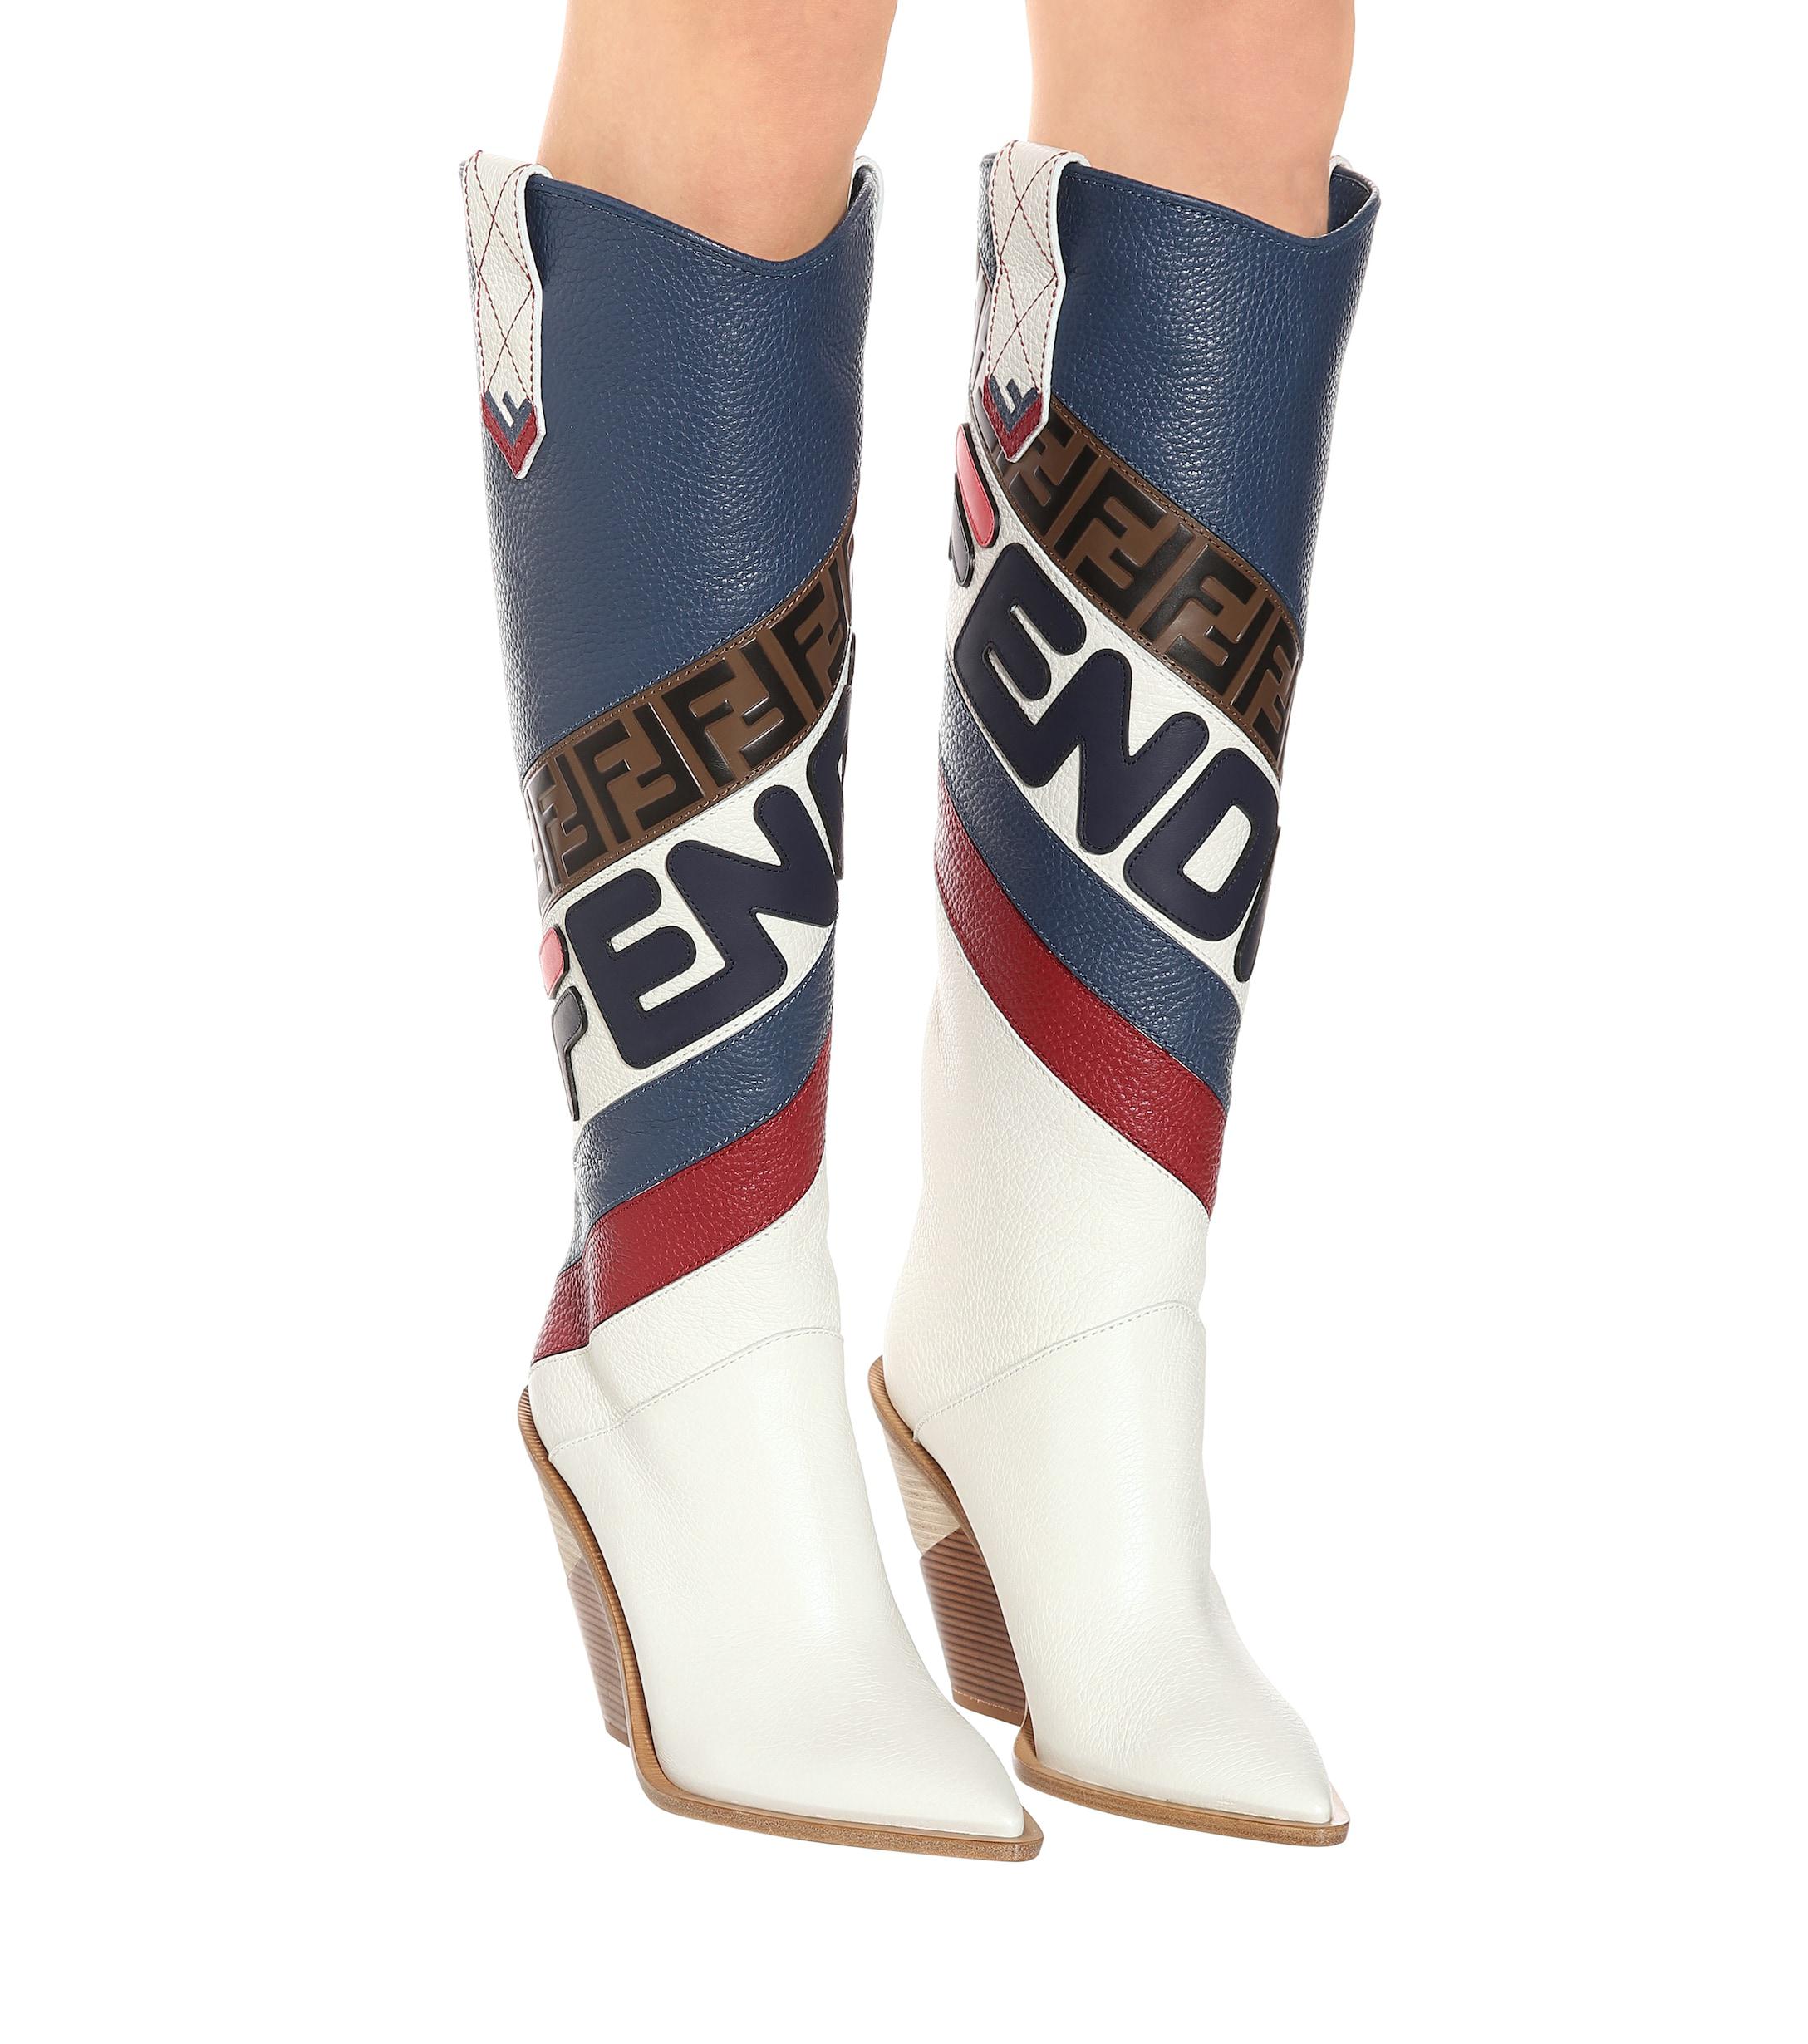 Fendi Mania Leather Knee-high Boots in 